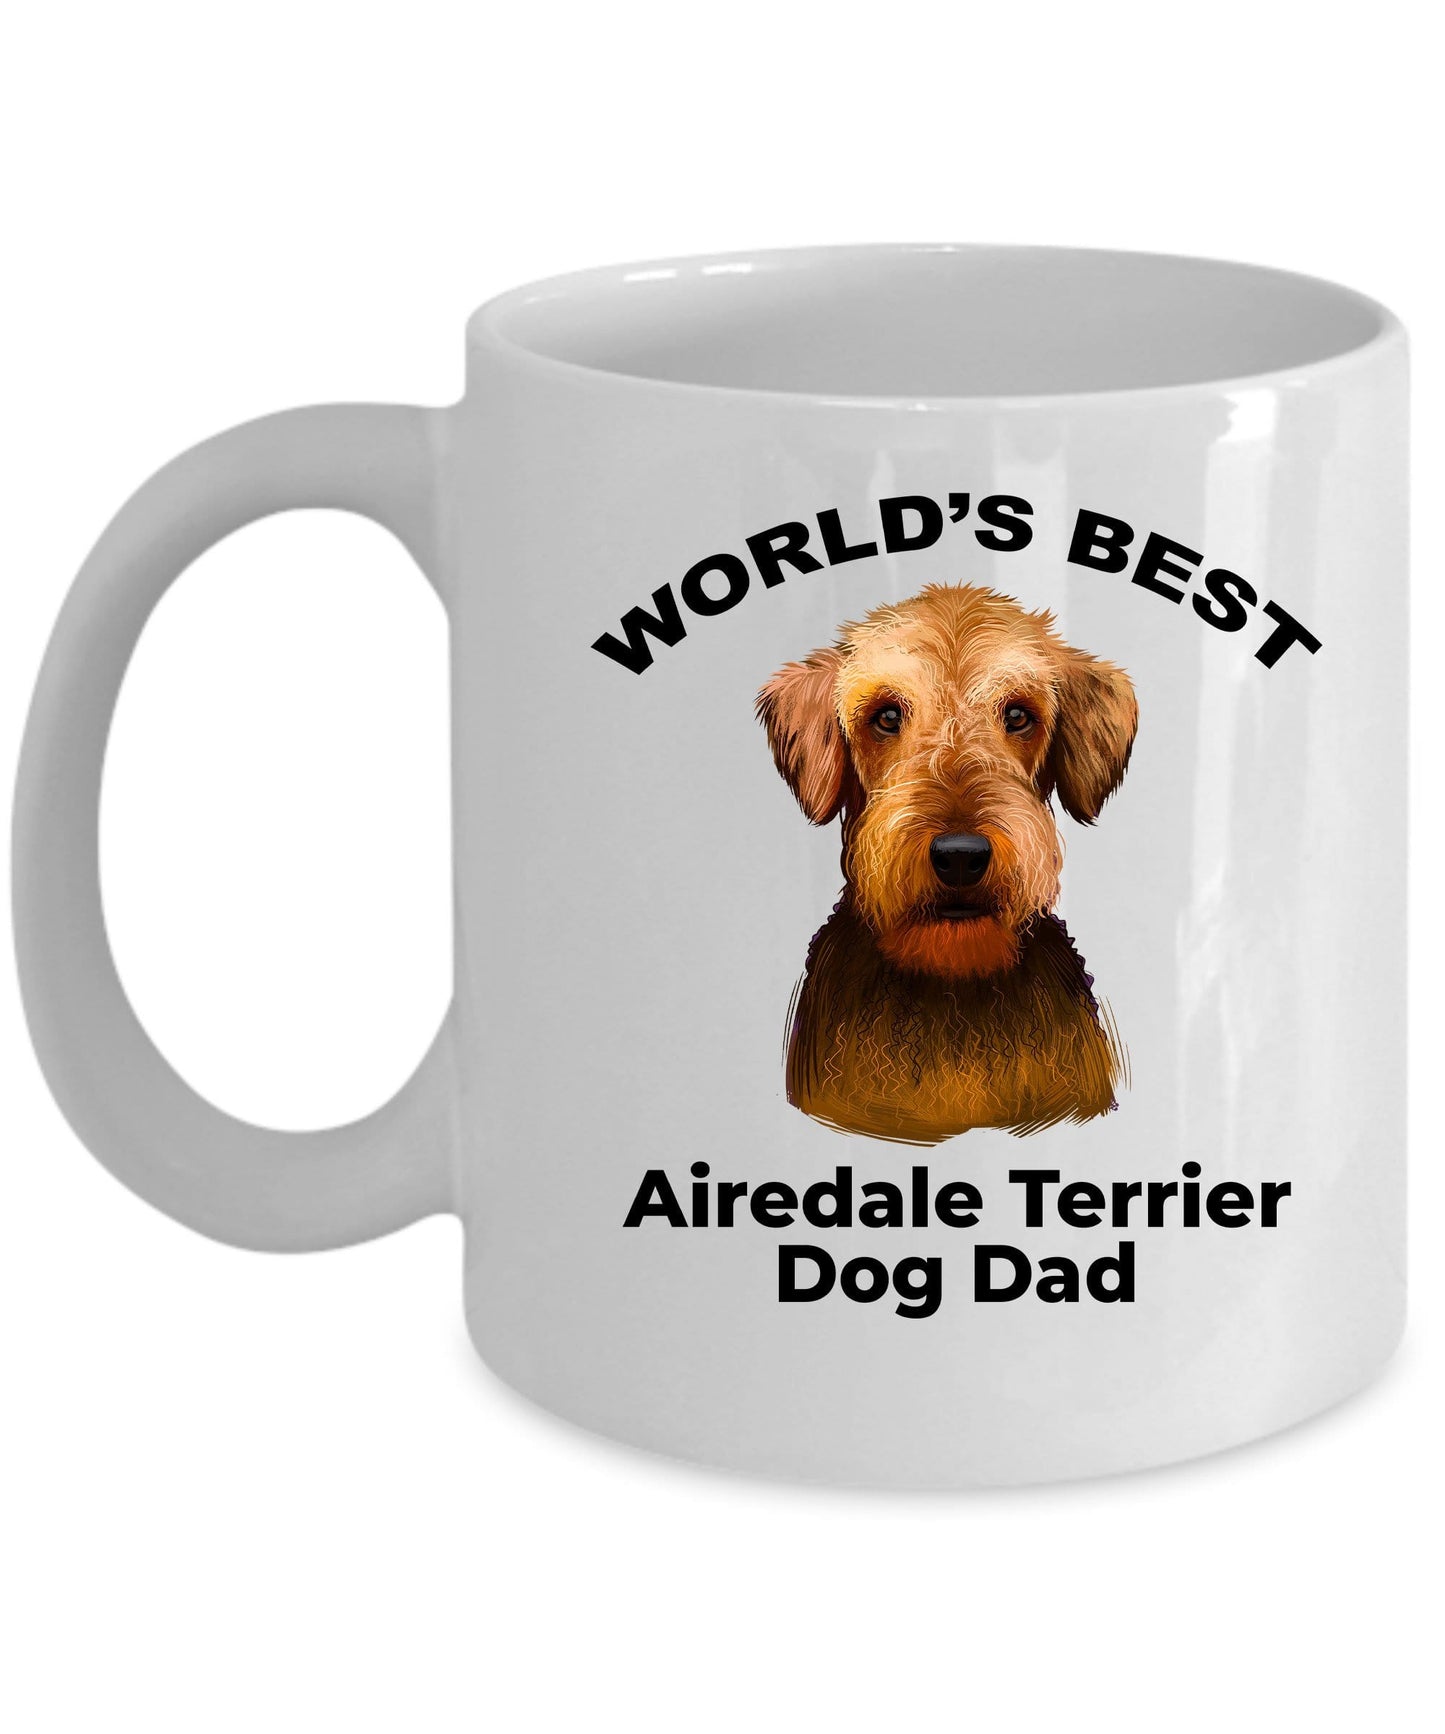 Airedale Terrier Best Dog Dad Two Tone and White Ceramic Coffee Mug